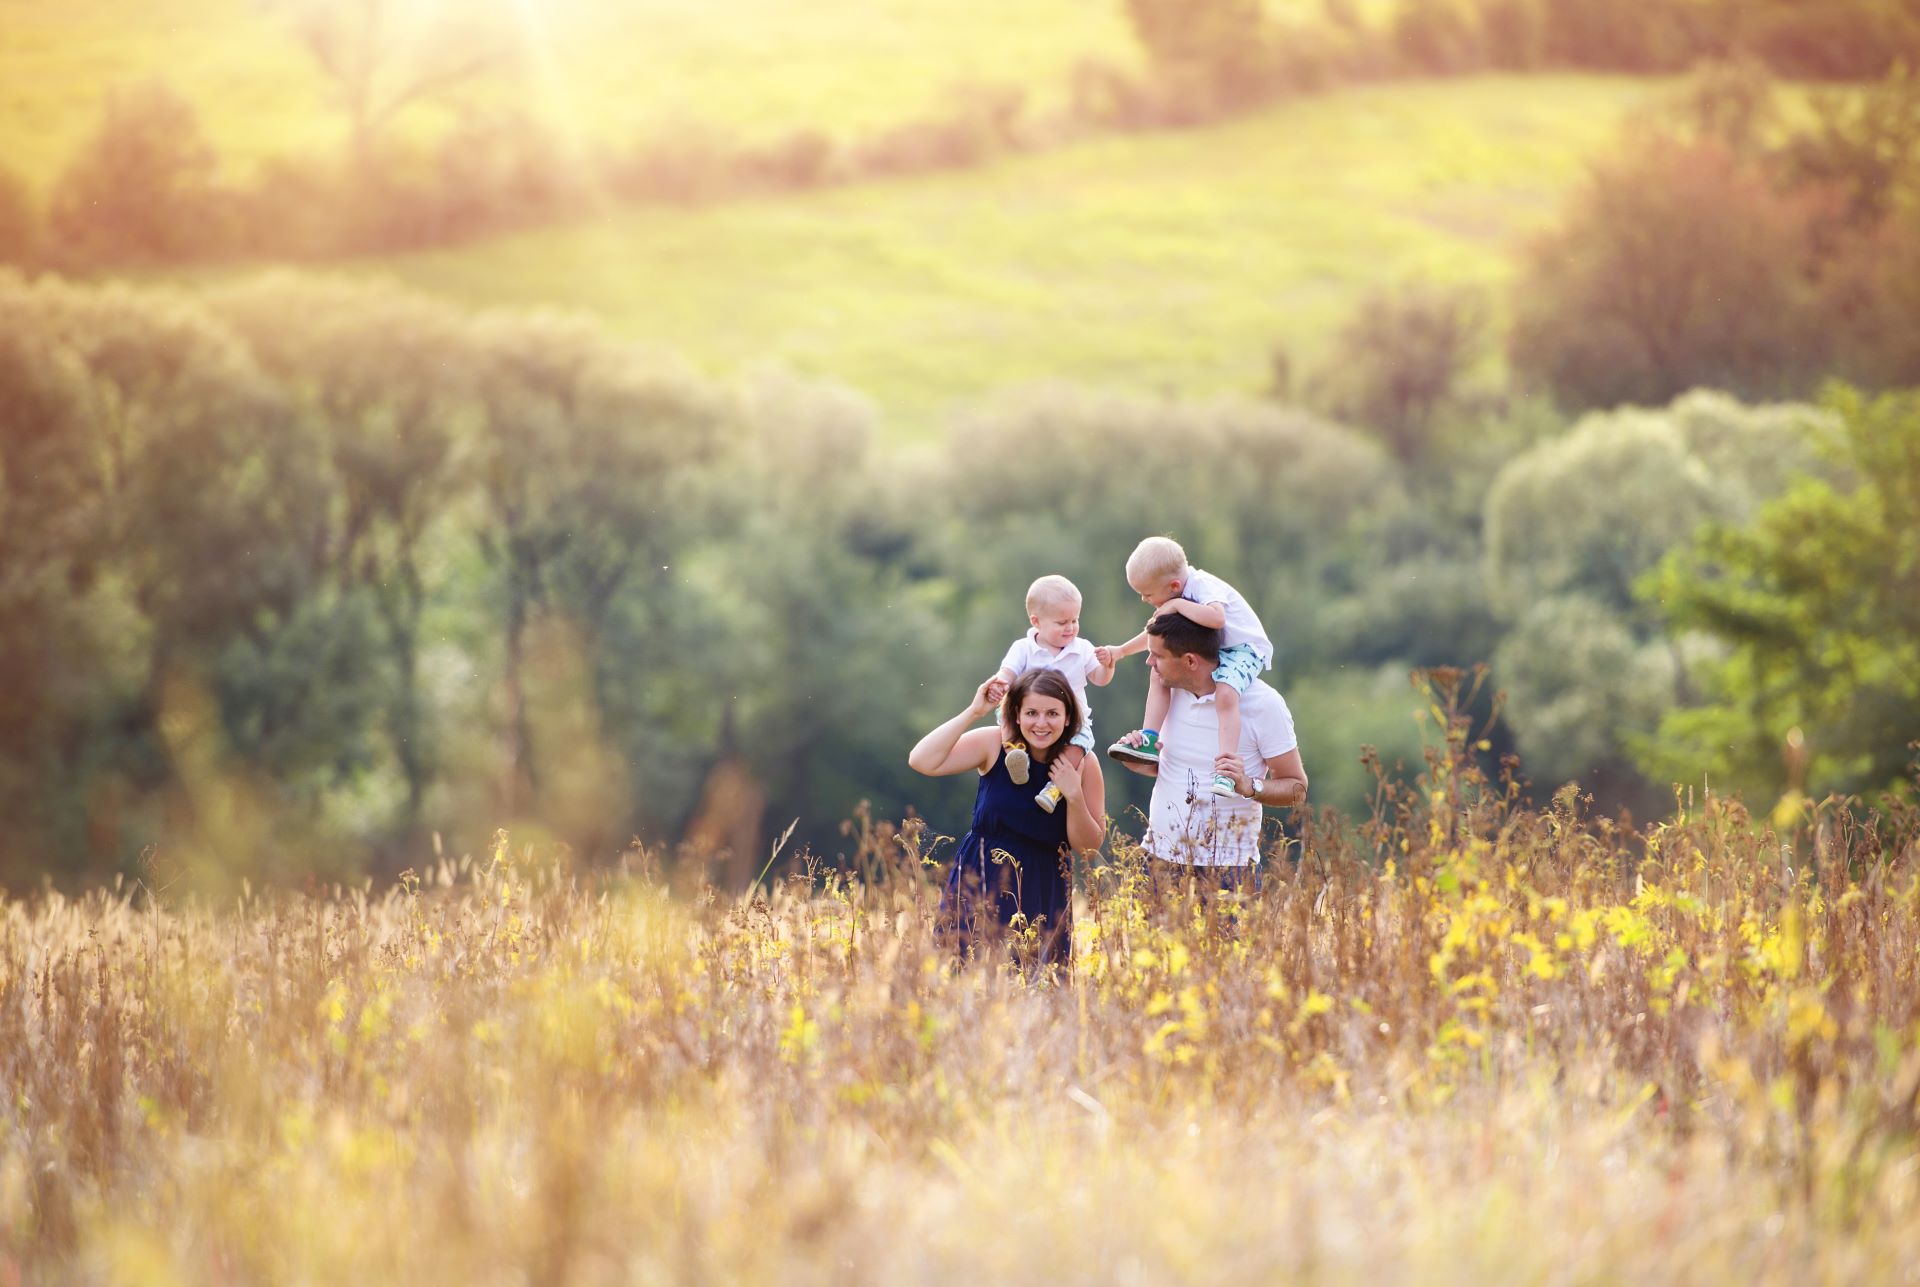 a family walking through a field in spring time